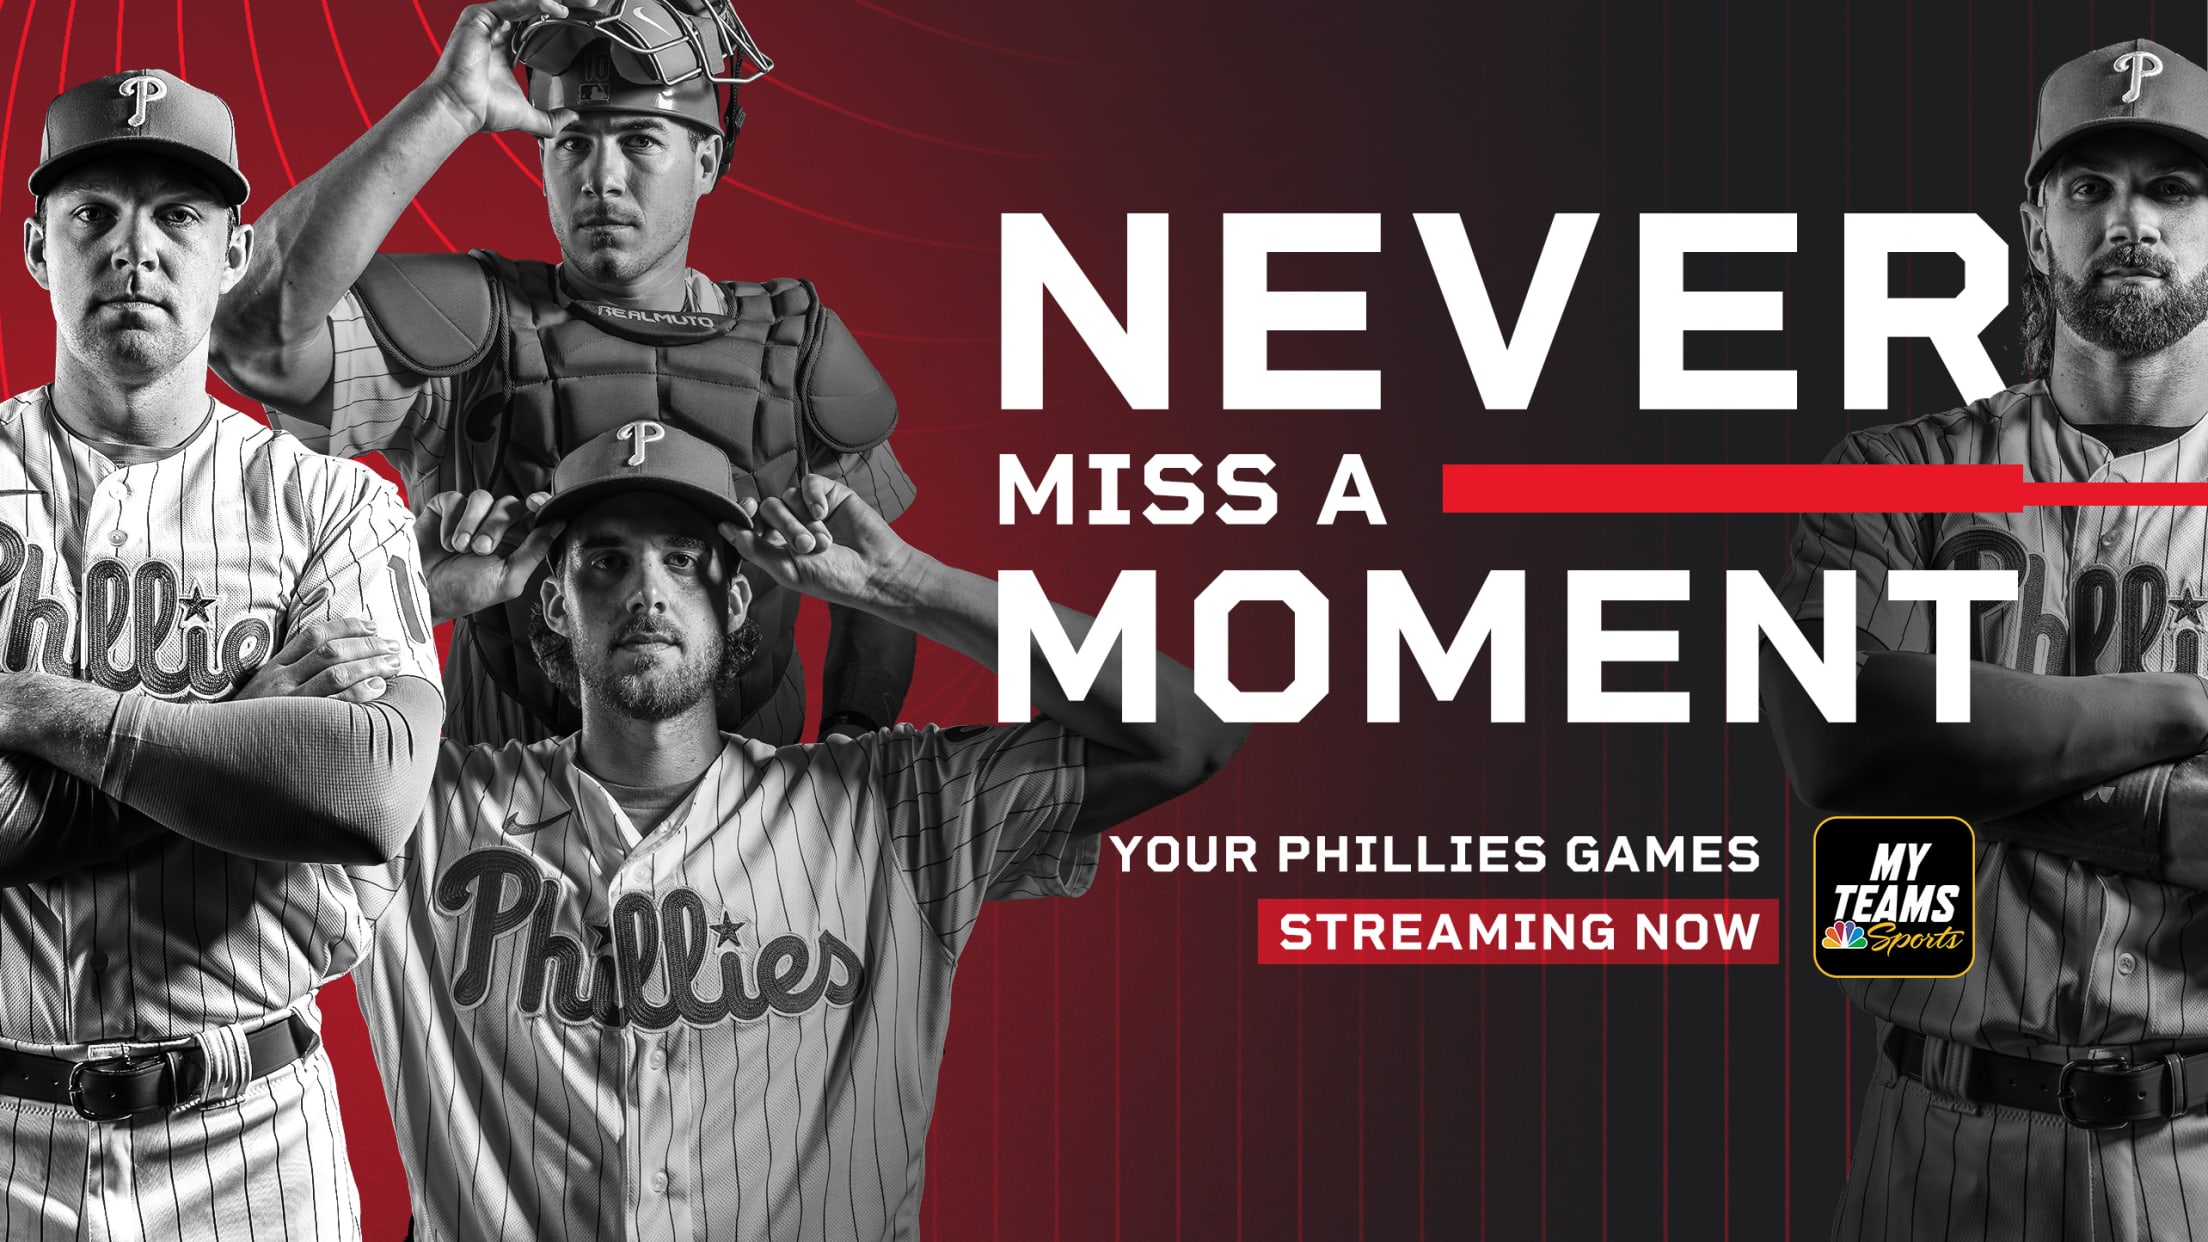 How to watch Cardinals vs. Phillies on TV, live stream, game times